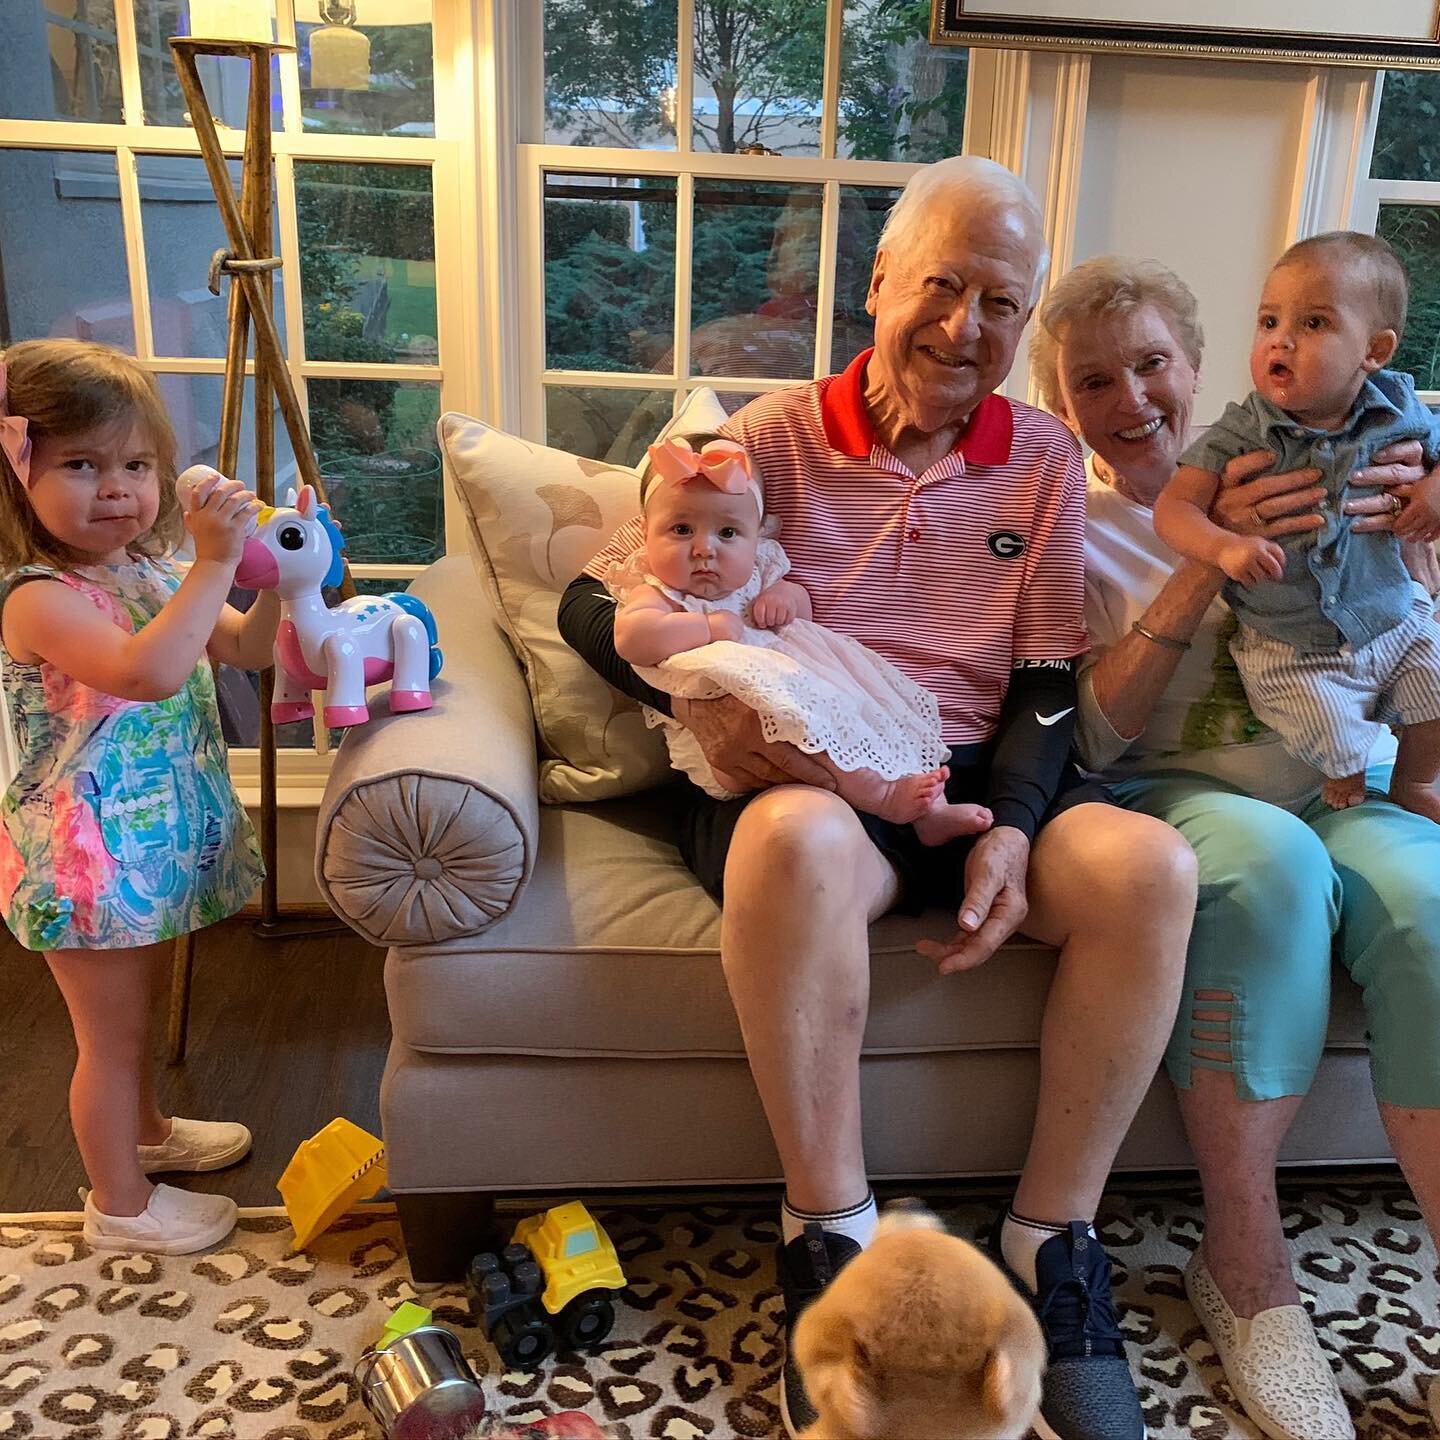 Labor Day Weekend fun with the family!! Grandma and Joe with the great-grandkids! These pictures are hard as hell to take, so you know we gotta post them! Happy Labor Day 🇺🇸 #ButlerBrigade @jacquievabutler @kssugar3 @cathycbutler @grandmabutler @th